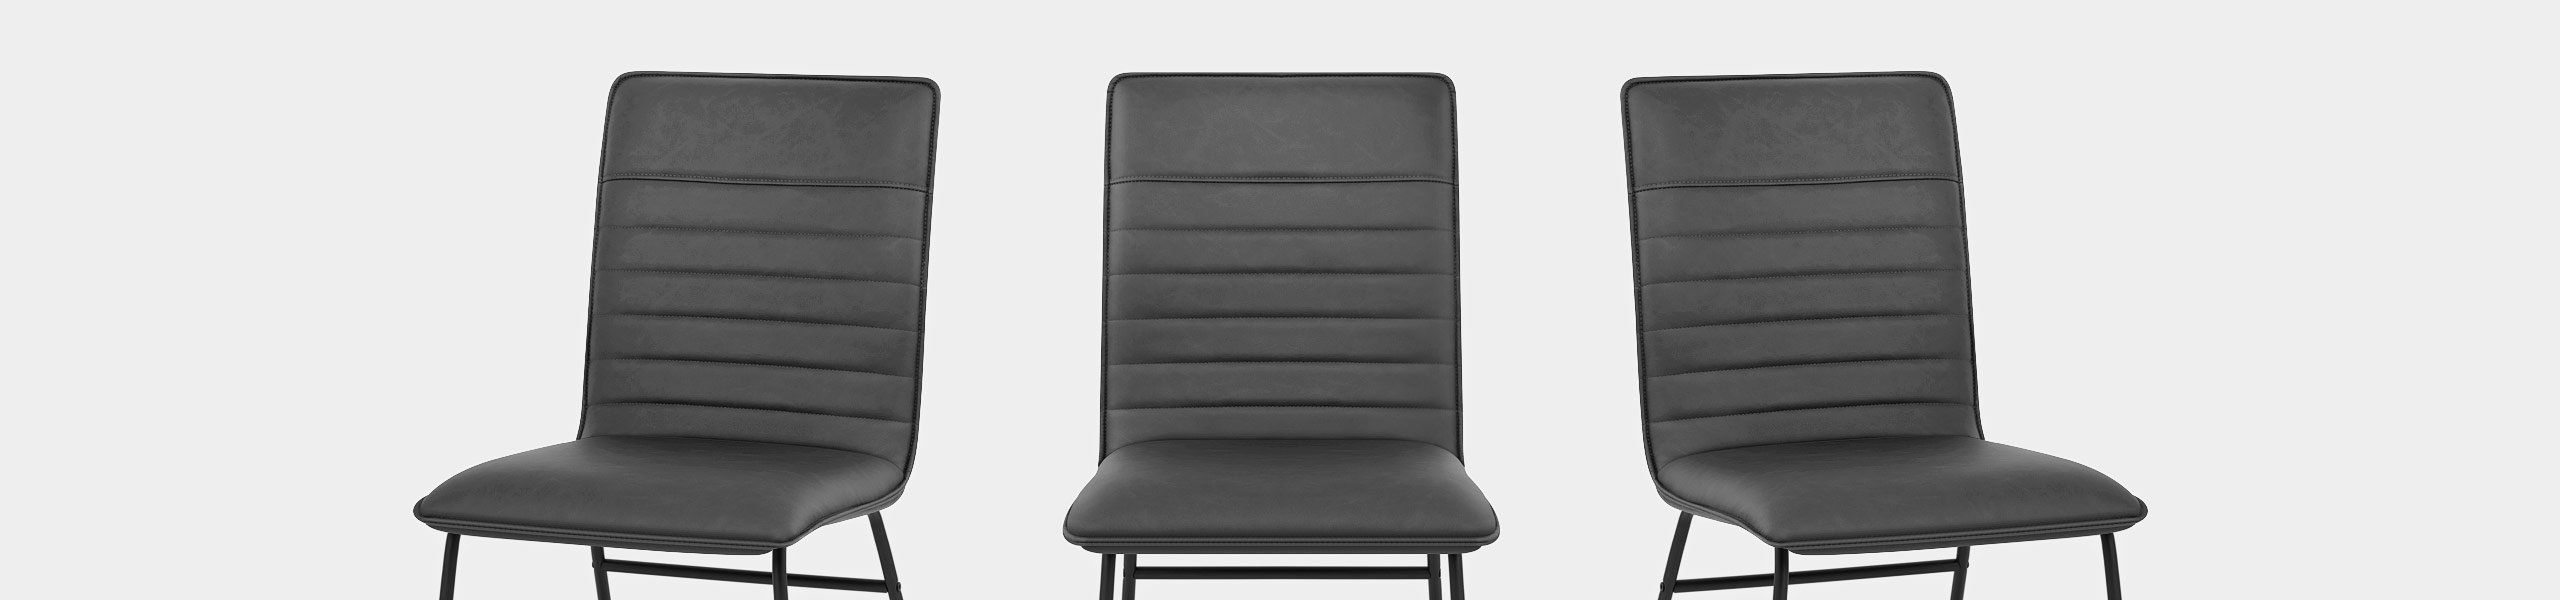 Chevelle Dining Chair Charcoal Leather Video Banner